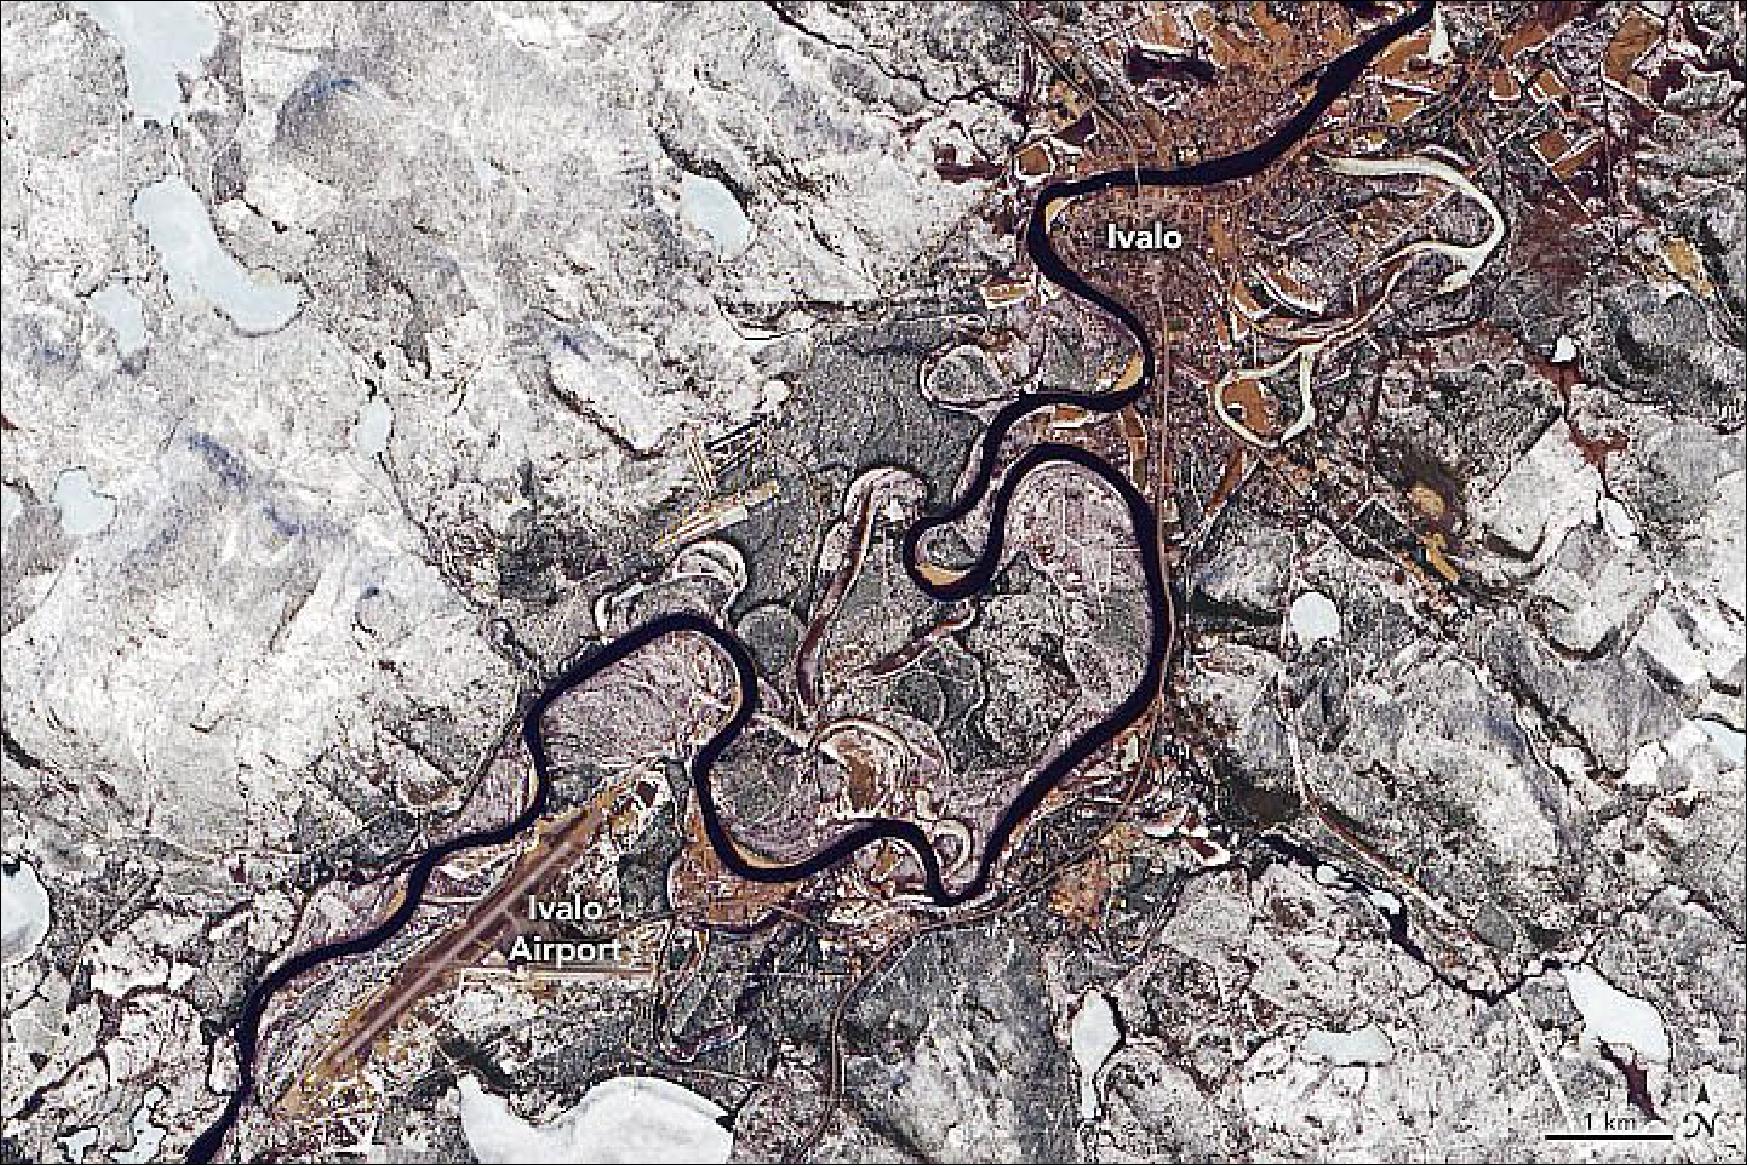 Figure 78: This natural-color image shows the area around Ivalo, Finland, on May 25, 2020. While some land remains frozen, other portions have become muddy with melt water. The image was acquired by the Operational Land Imager (OLI) on Landsat-8. The extent of the flooding also appears in images by satellites using synthetic-aperture radar (image credit: NASA Earth Observatory, image by Joshua Stevens, using Landsat data from the U.S. Geological Survey. Story by Kasha Patel)